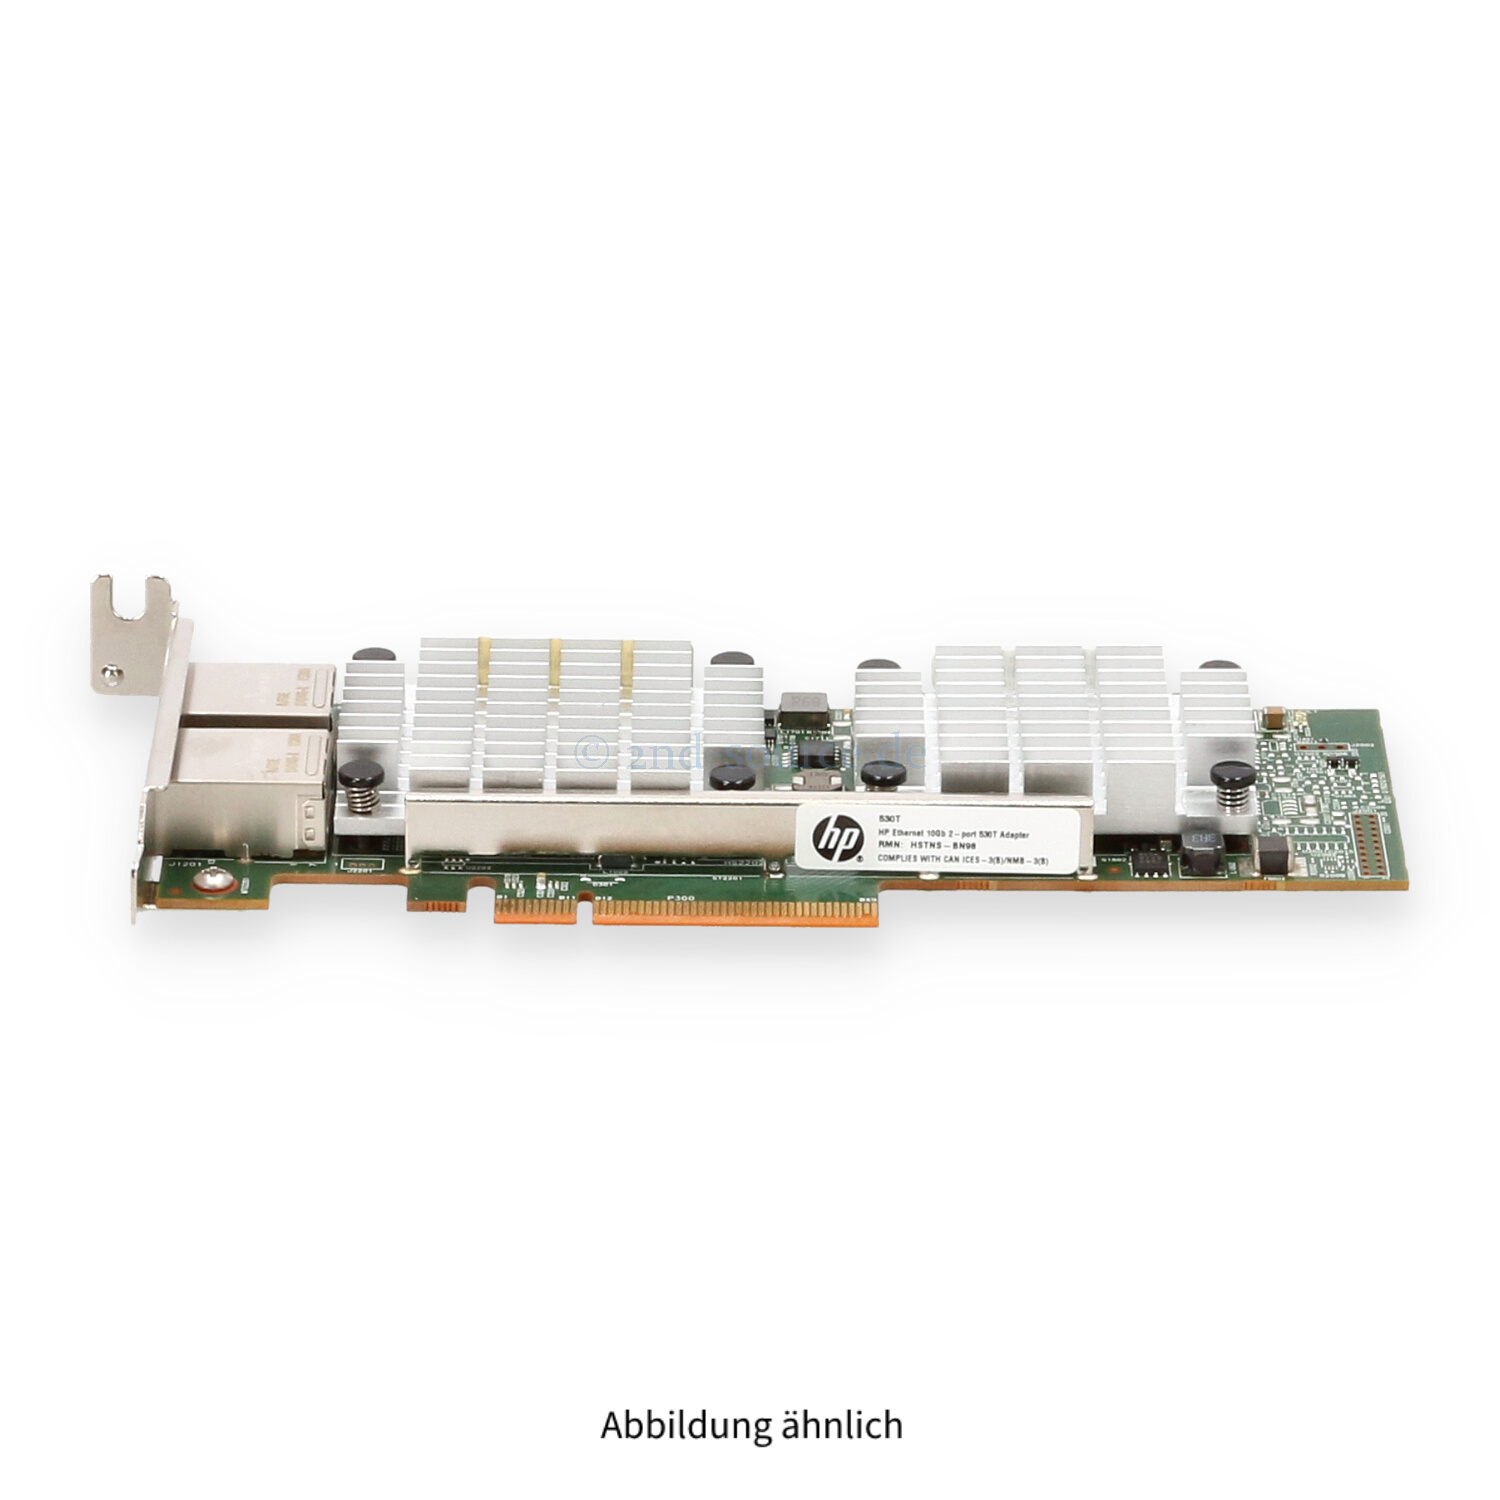 HPE 530T 2x 10GbE PCIe Server Ethernet Adapter Low Profile 656596-B21 657128-001